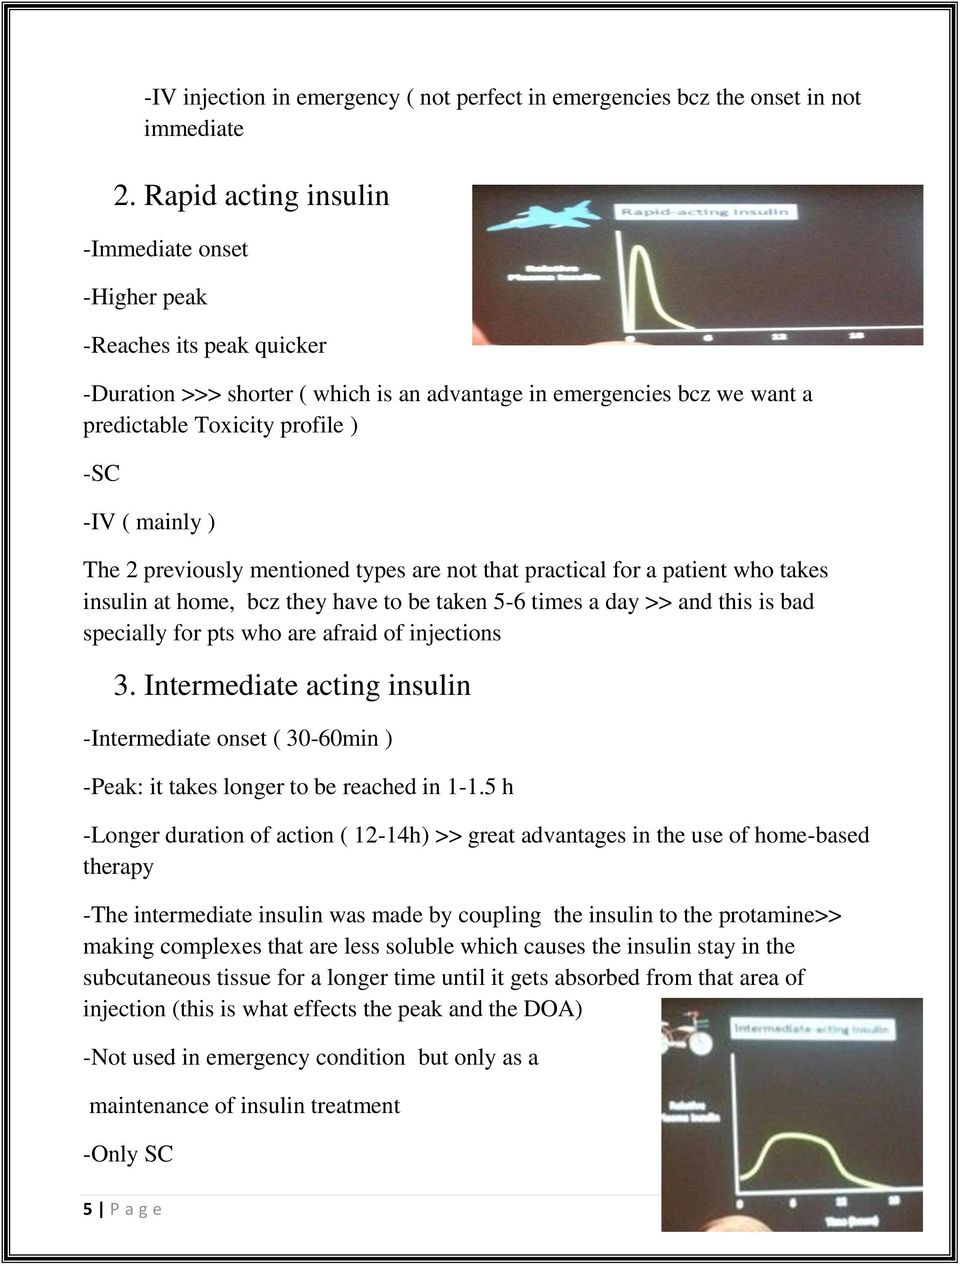 ) The 2 previously mentioned types are not that practical for a patient who takes insulin at home, bcz they have to be taken 5-6 times a day >> and this is bad specially for pts who are afraid of